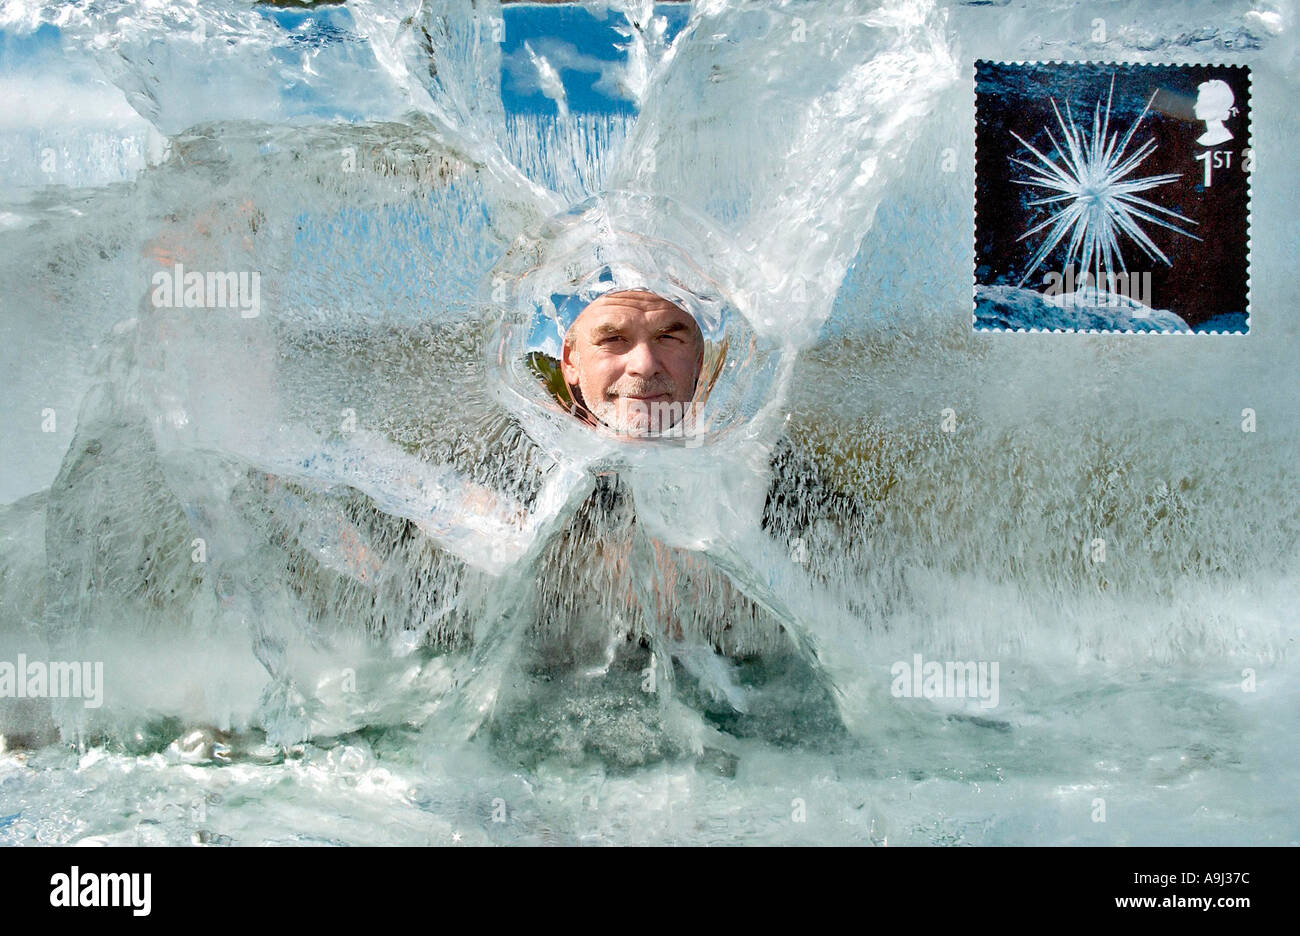 Sculptor Andy Goldsworthy appears set in a block of ice Stock Photo